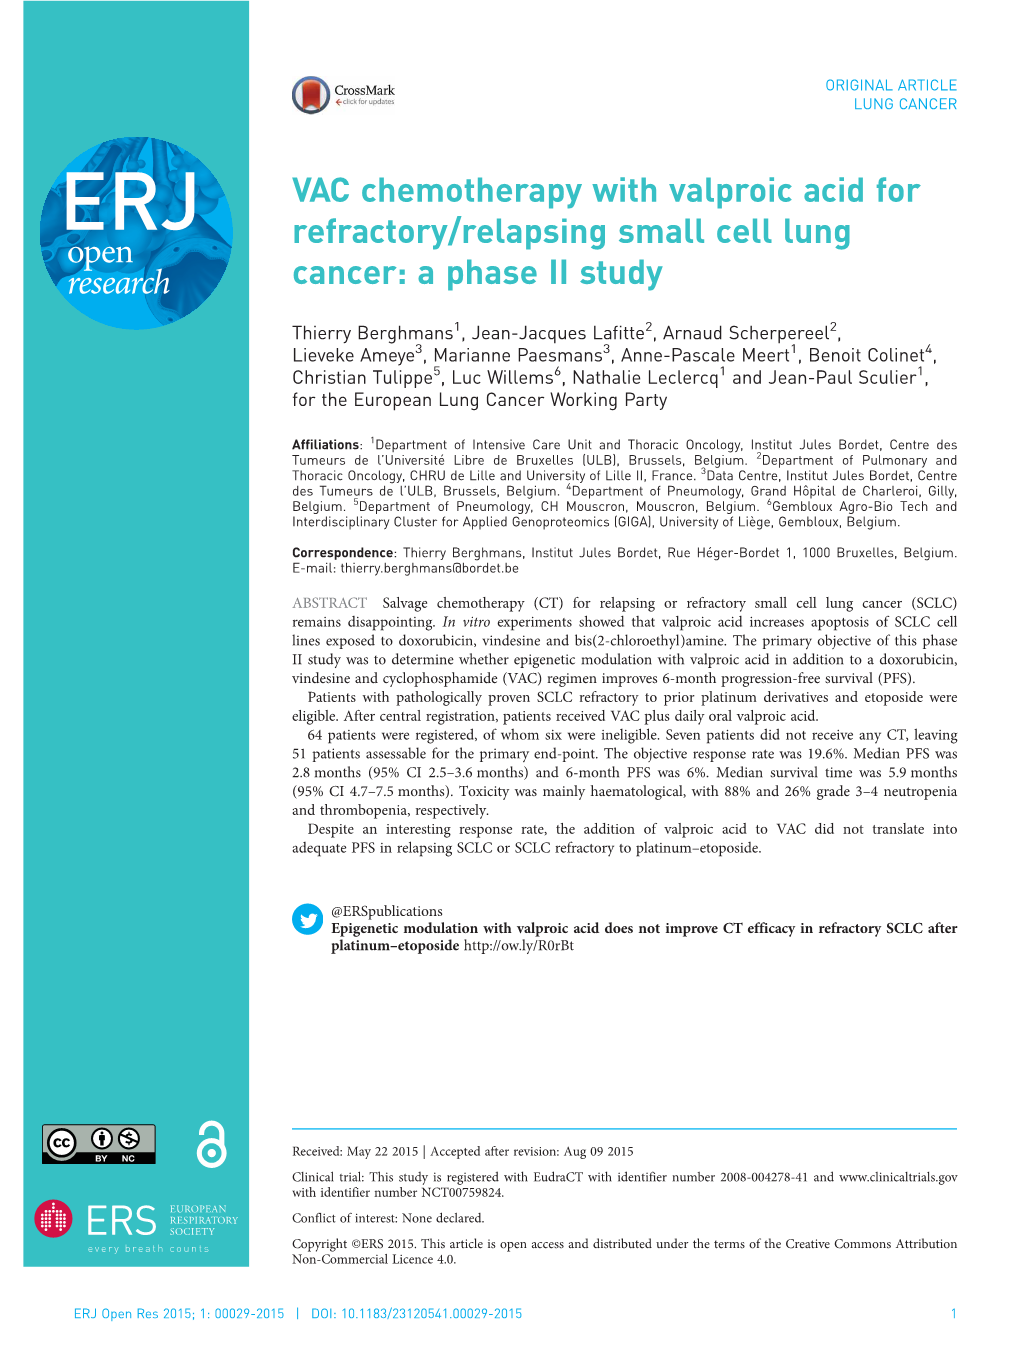 VAC Chemotherapy with Valproic Acid for Refractory/Relapsing Small Cell Lung Cancer: a Phase II Study